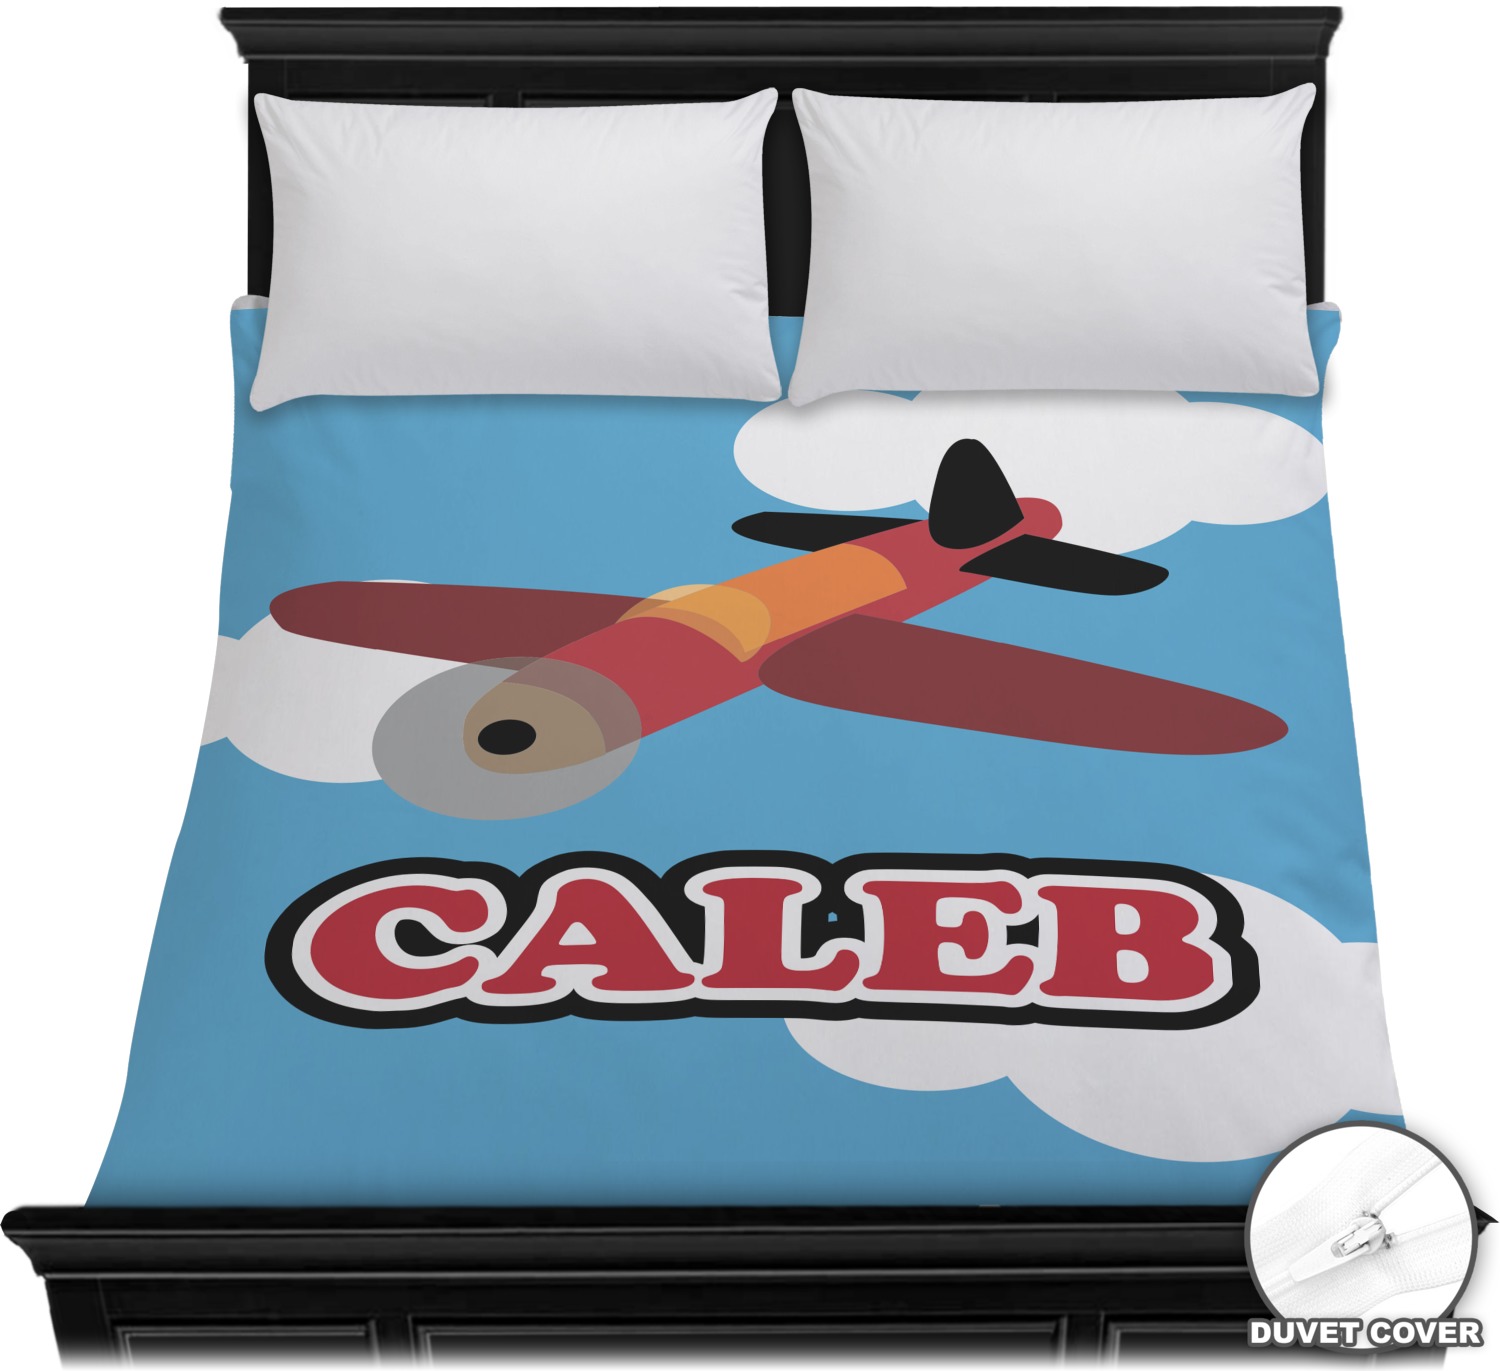 Airplane Duvet Cover Personalized Youcustomizeit